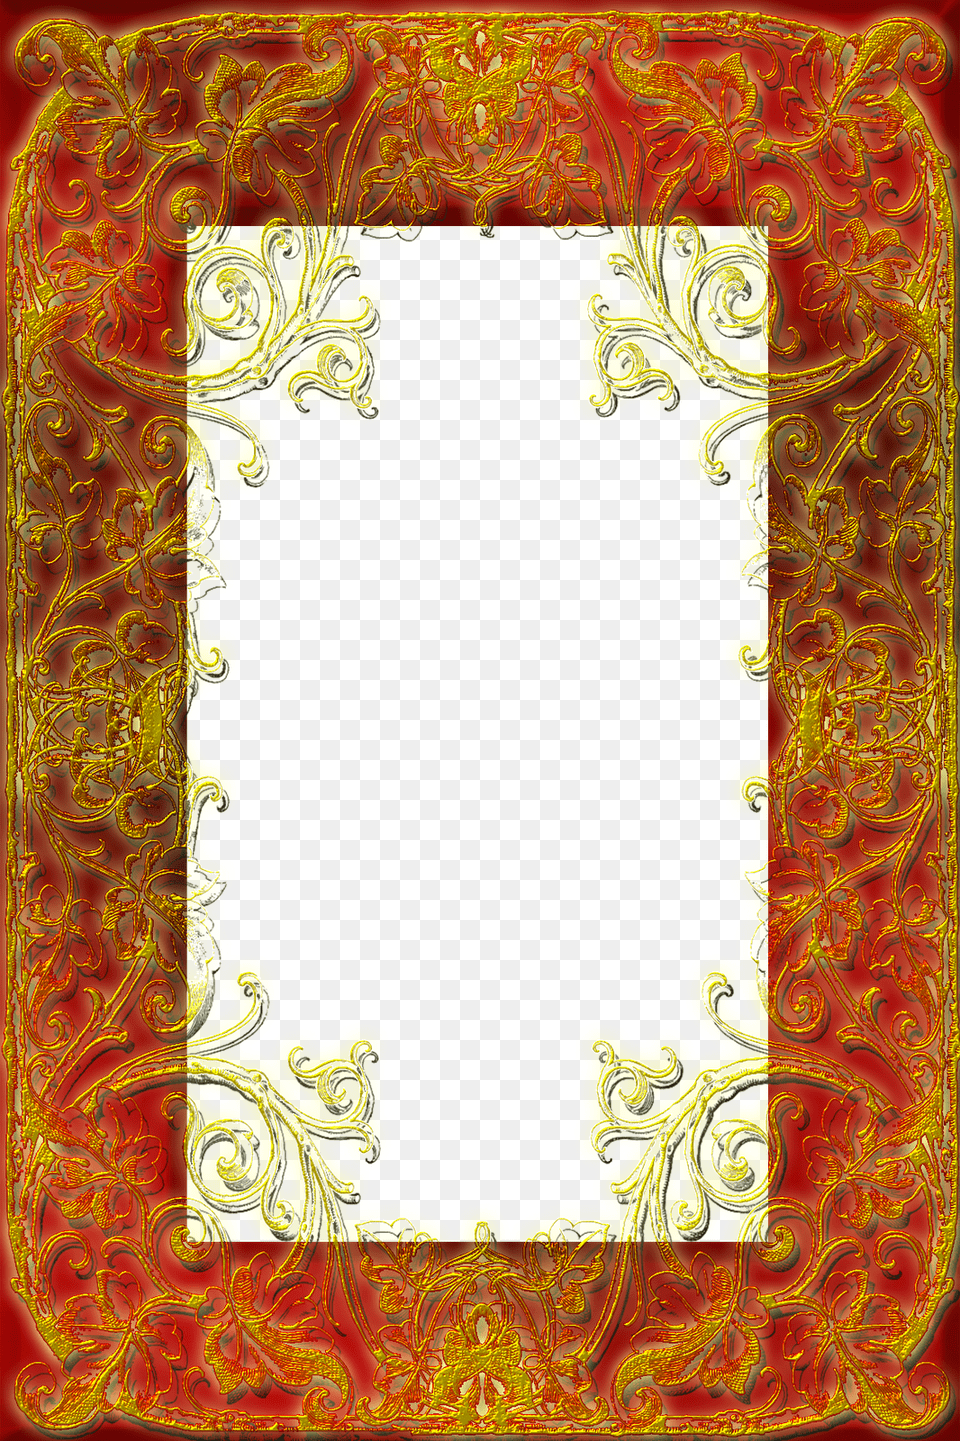 Cool Backgrounds Frames Jul Romantic Pictures Picture Frame, Pattern, Art, Floral Design, Graphics Free Png Download